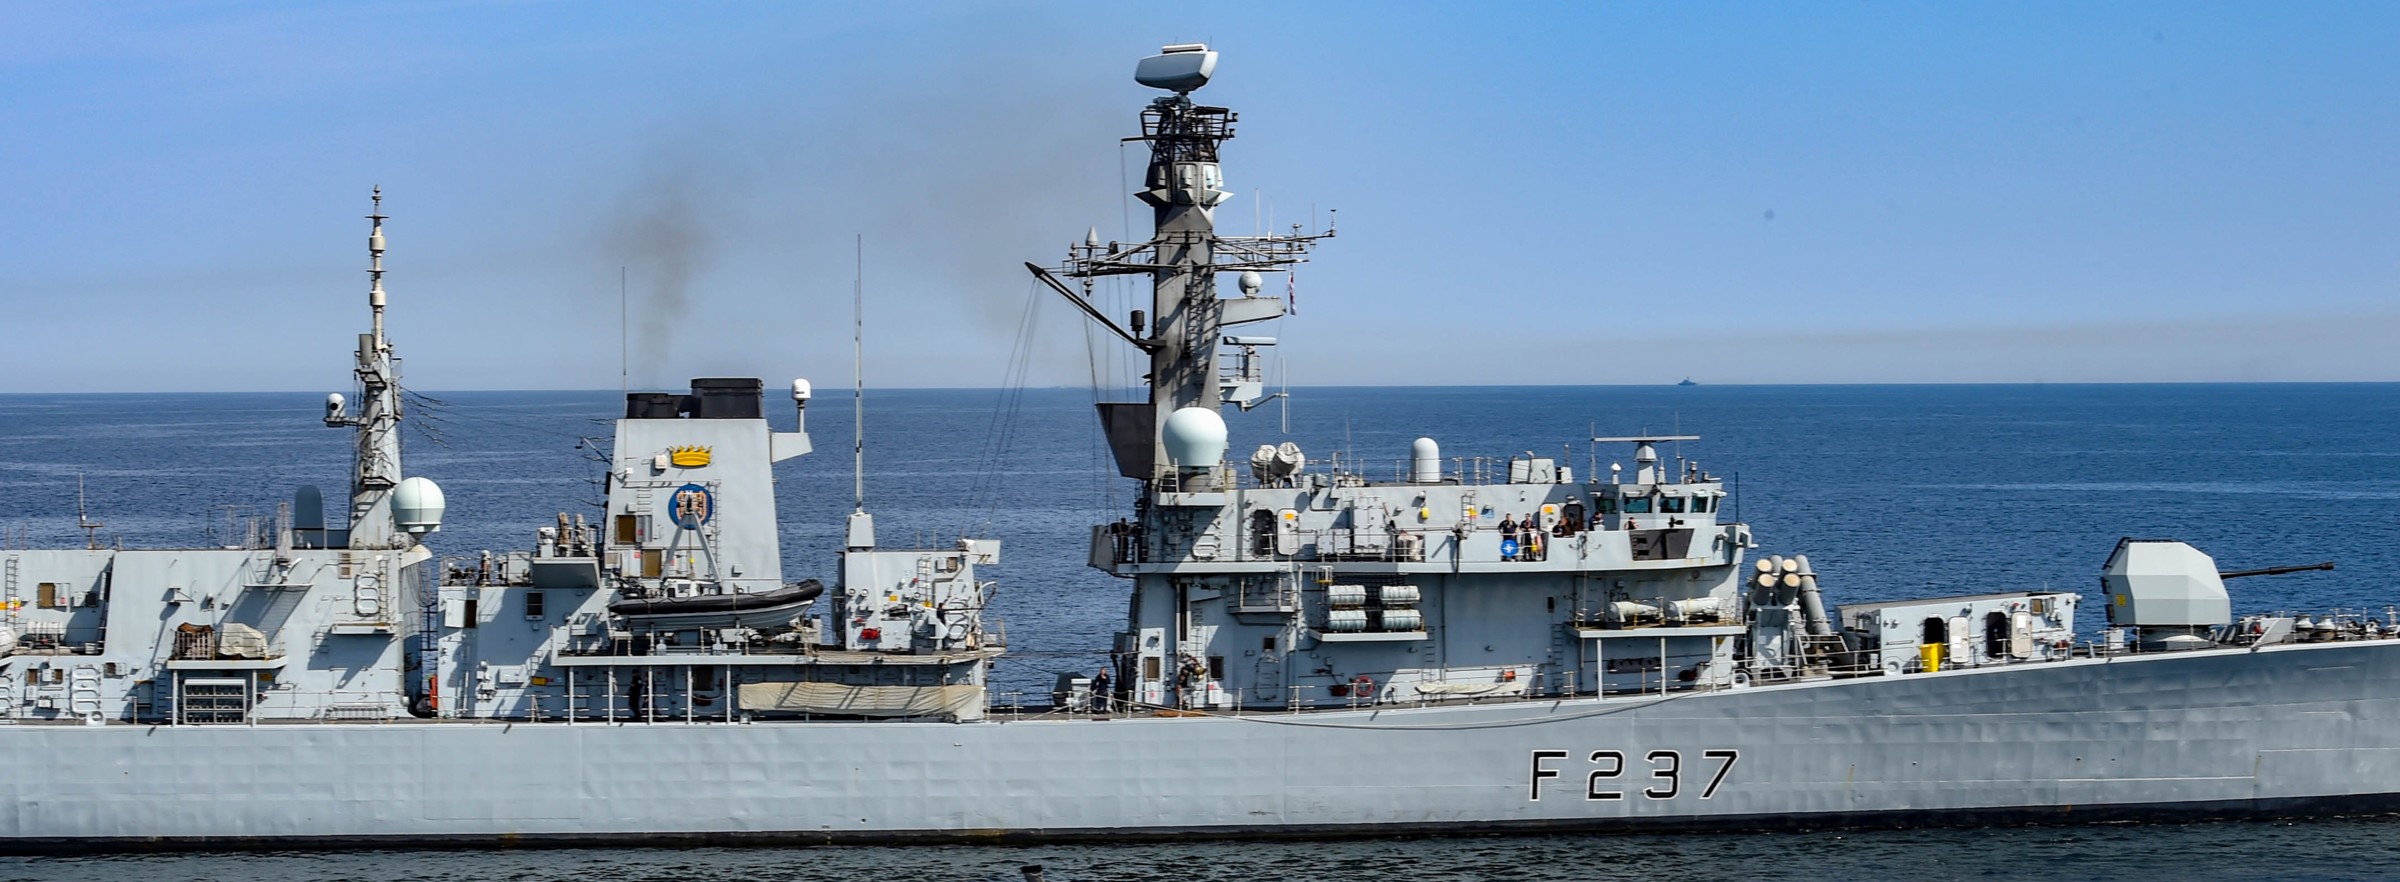 f-237 hms westminster type 23 duke class guided missile frigate ffg royal navy 18